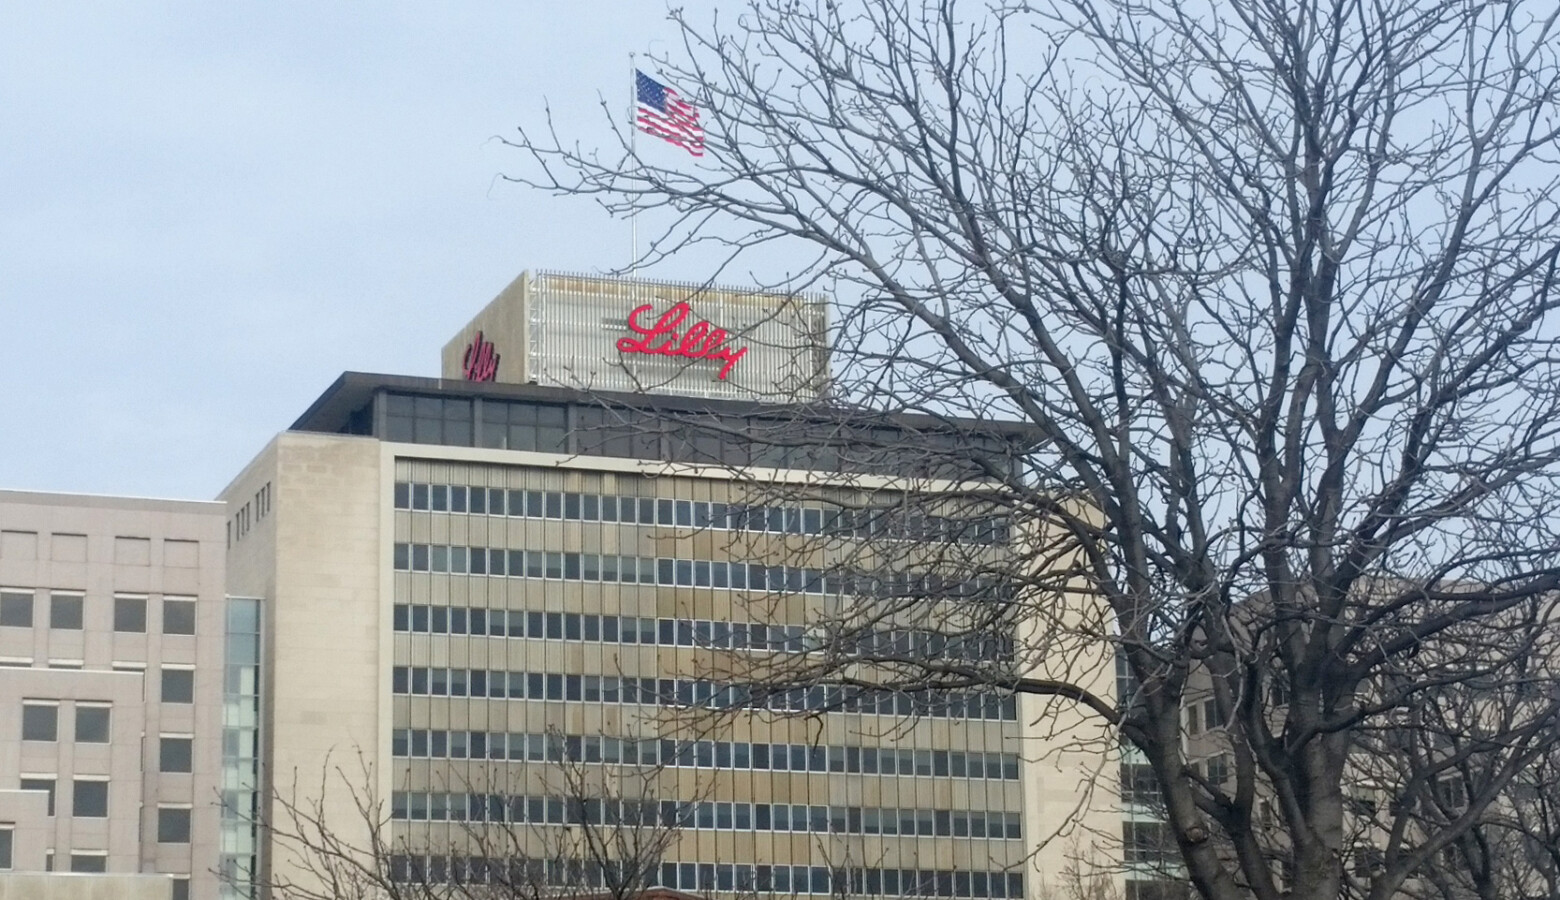 Eli Lilly's Corporate Headquarters in Indianapolis. The company announced Monday it had started the world's first COVID-19 antibody treatment in humans study. (Lauren Chapman/IPB News)